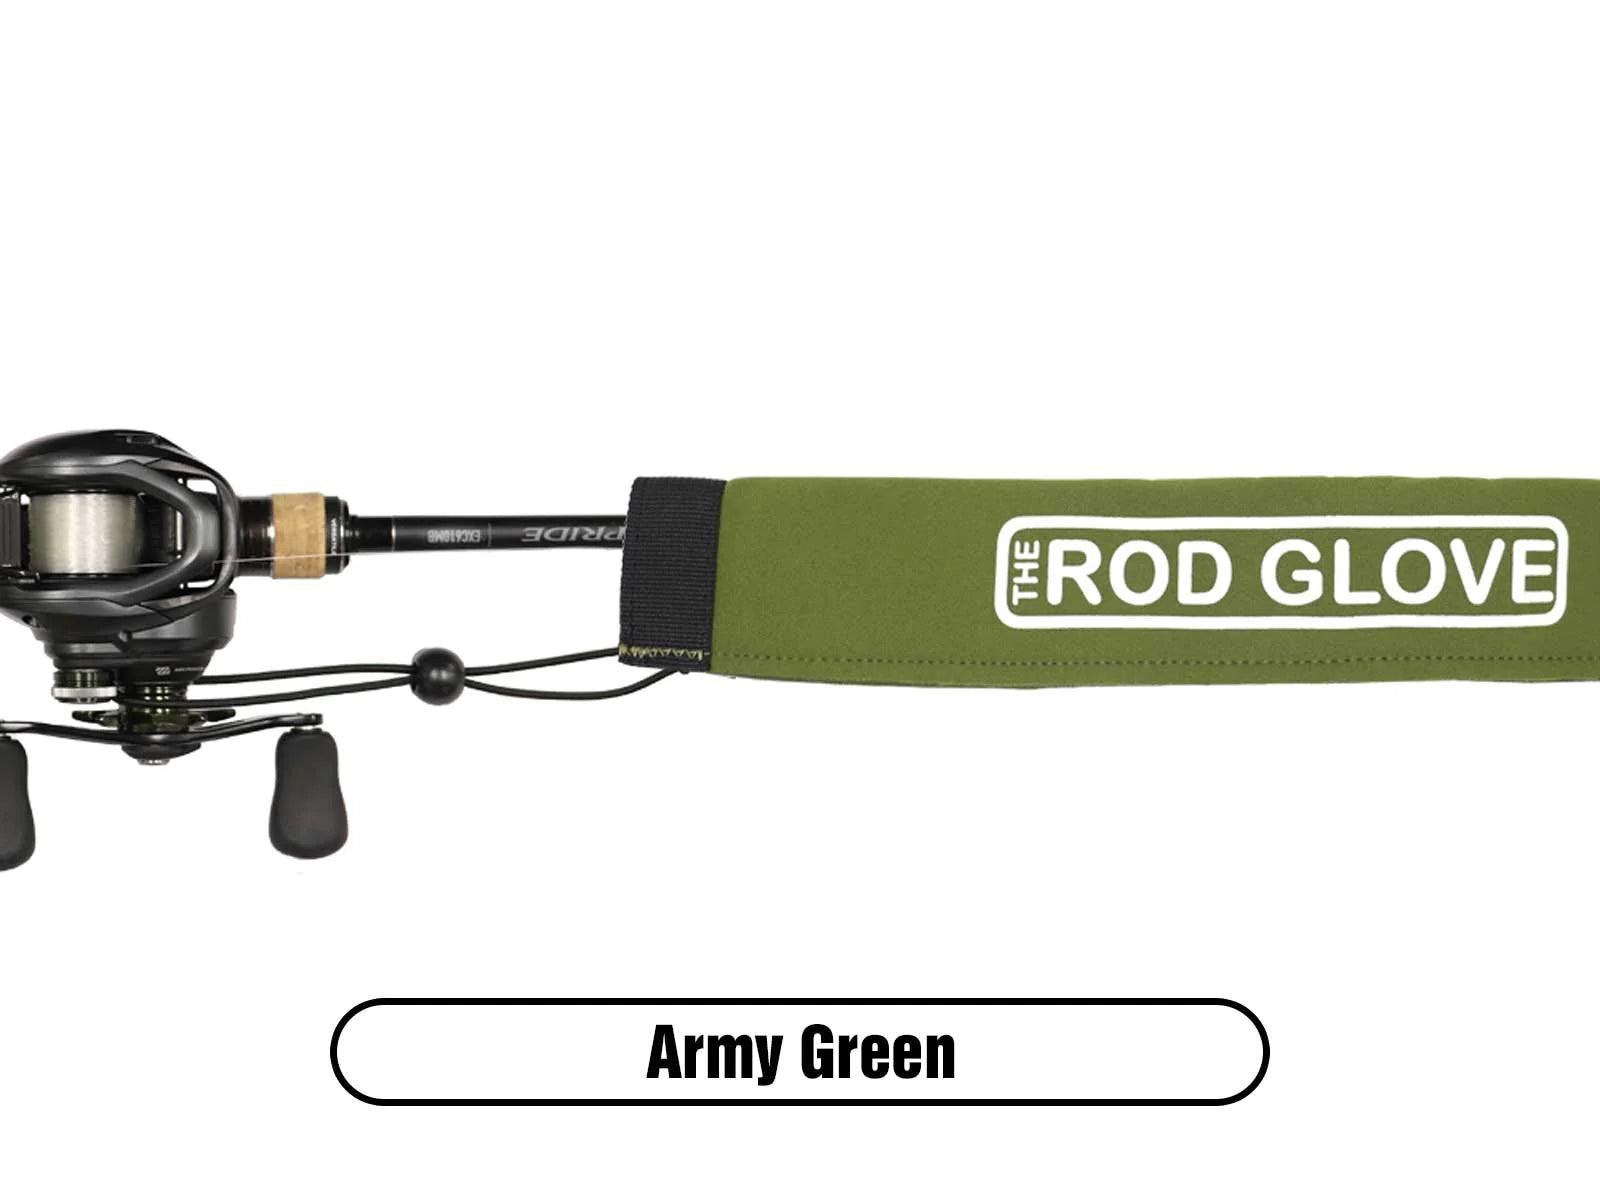 https://cdn.shopify.com/s/files/1/0606/8692/6048/products/Tournament-Series-casting-Rod-Glove-Army-Green.webp?v=1680661677&width=1600